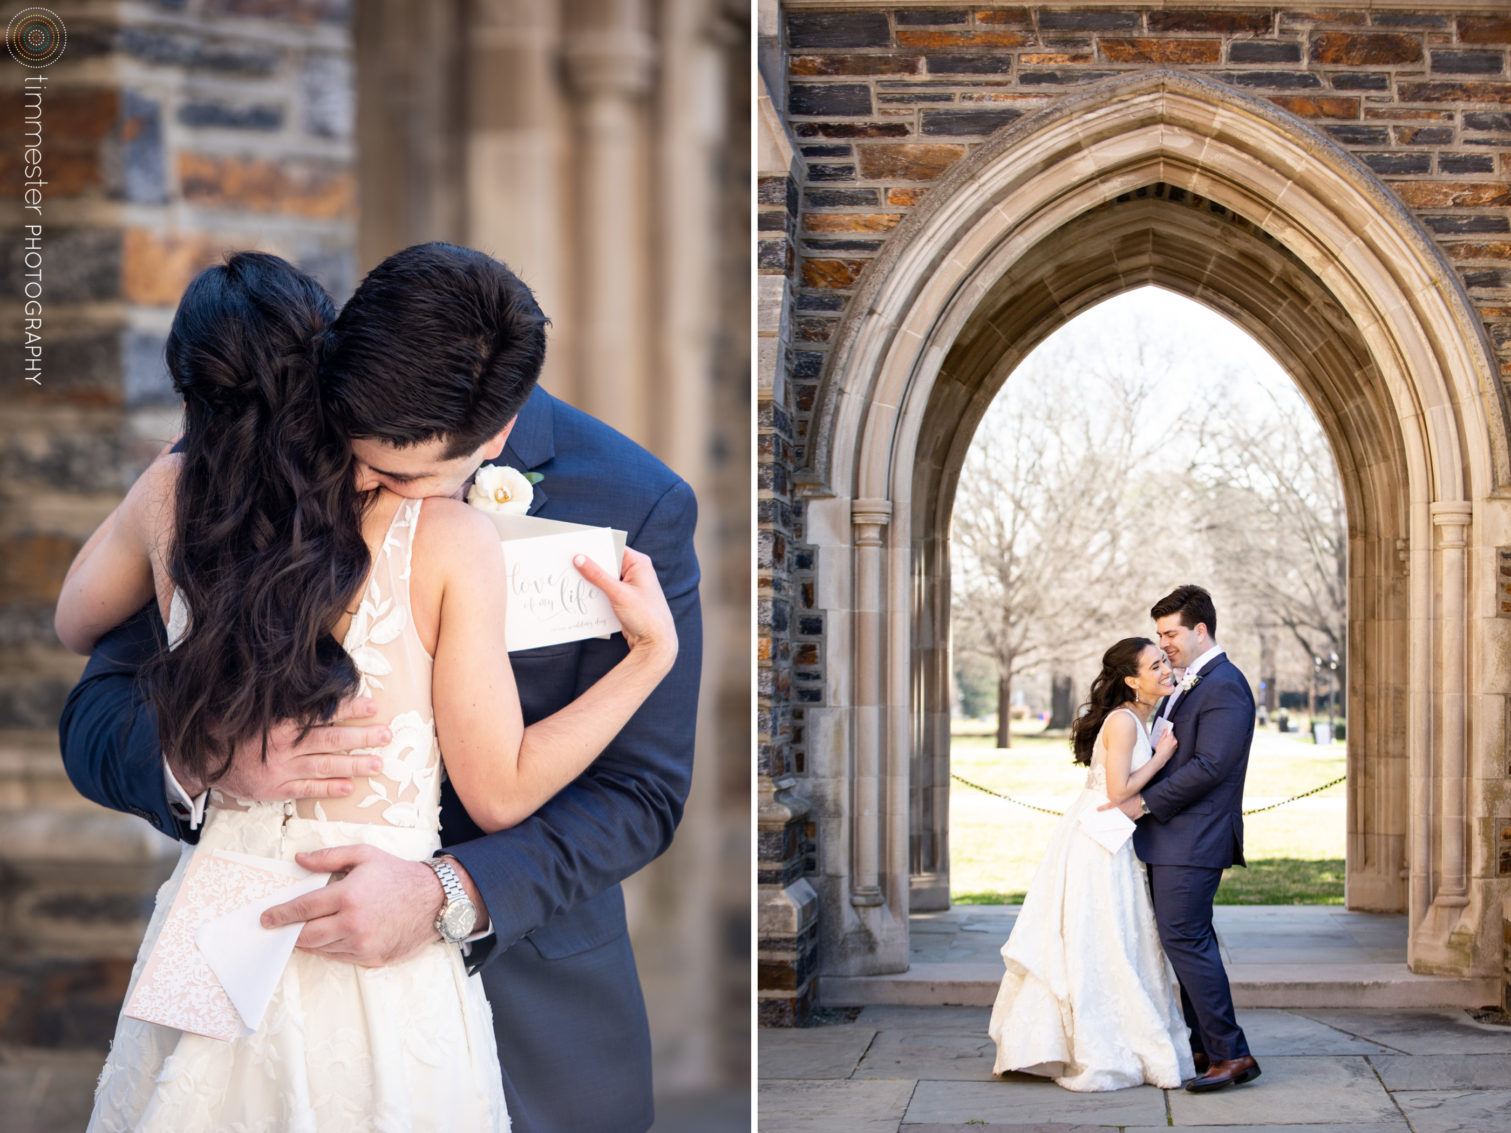 Private vows between the bride and groom on their wedding day at Duke University Chapel